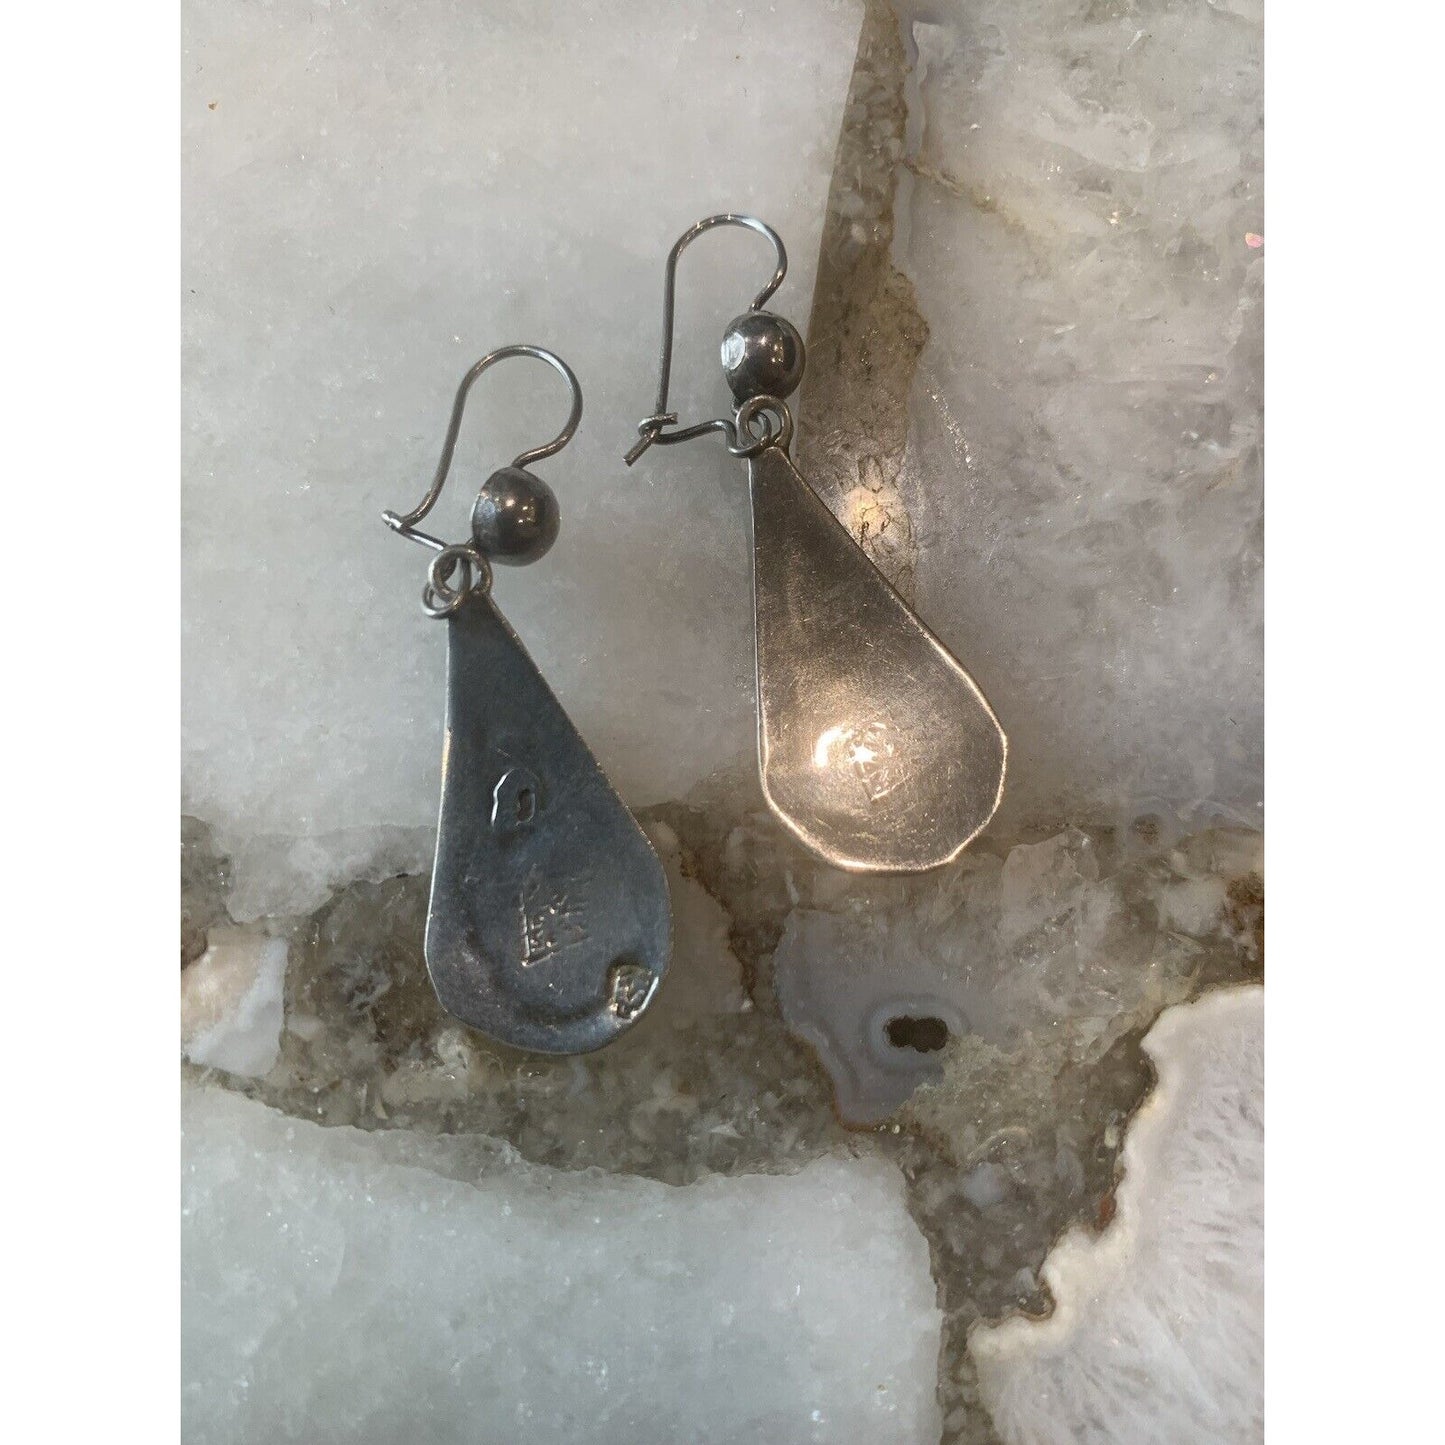 Stainless Teardrop Earrings with Colored-Chipped Inlays- Native American Inspired